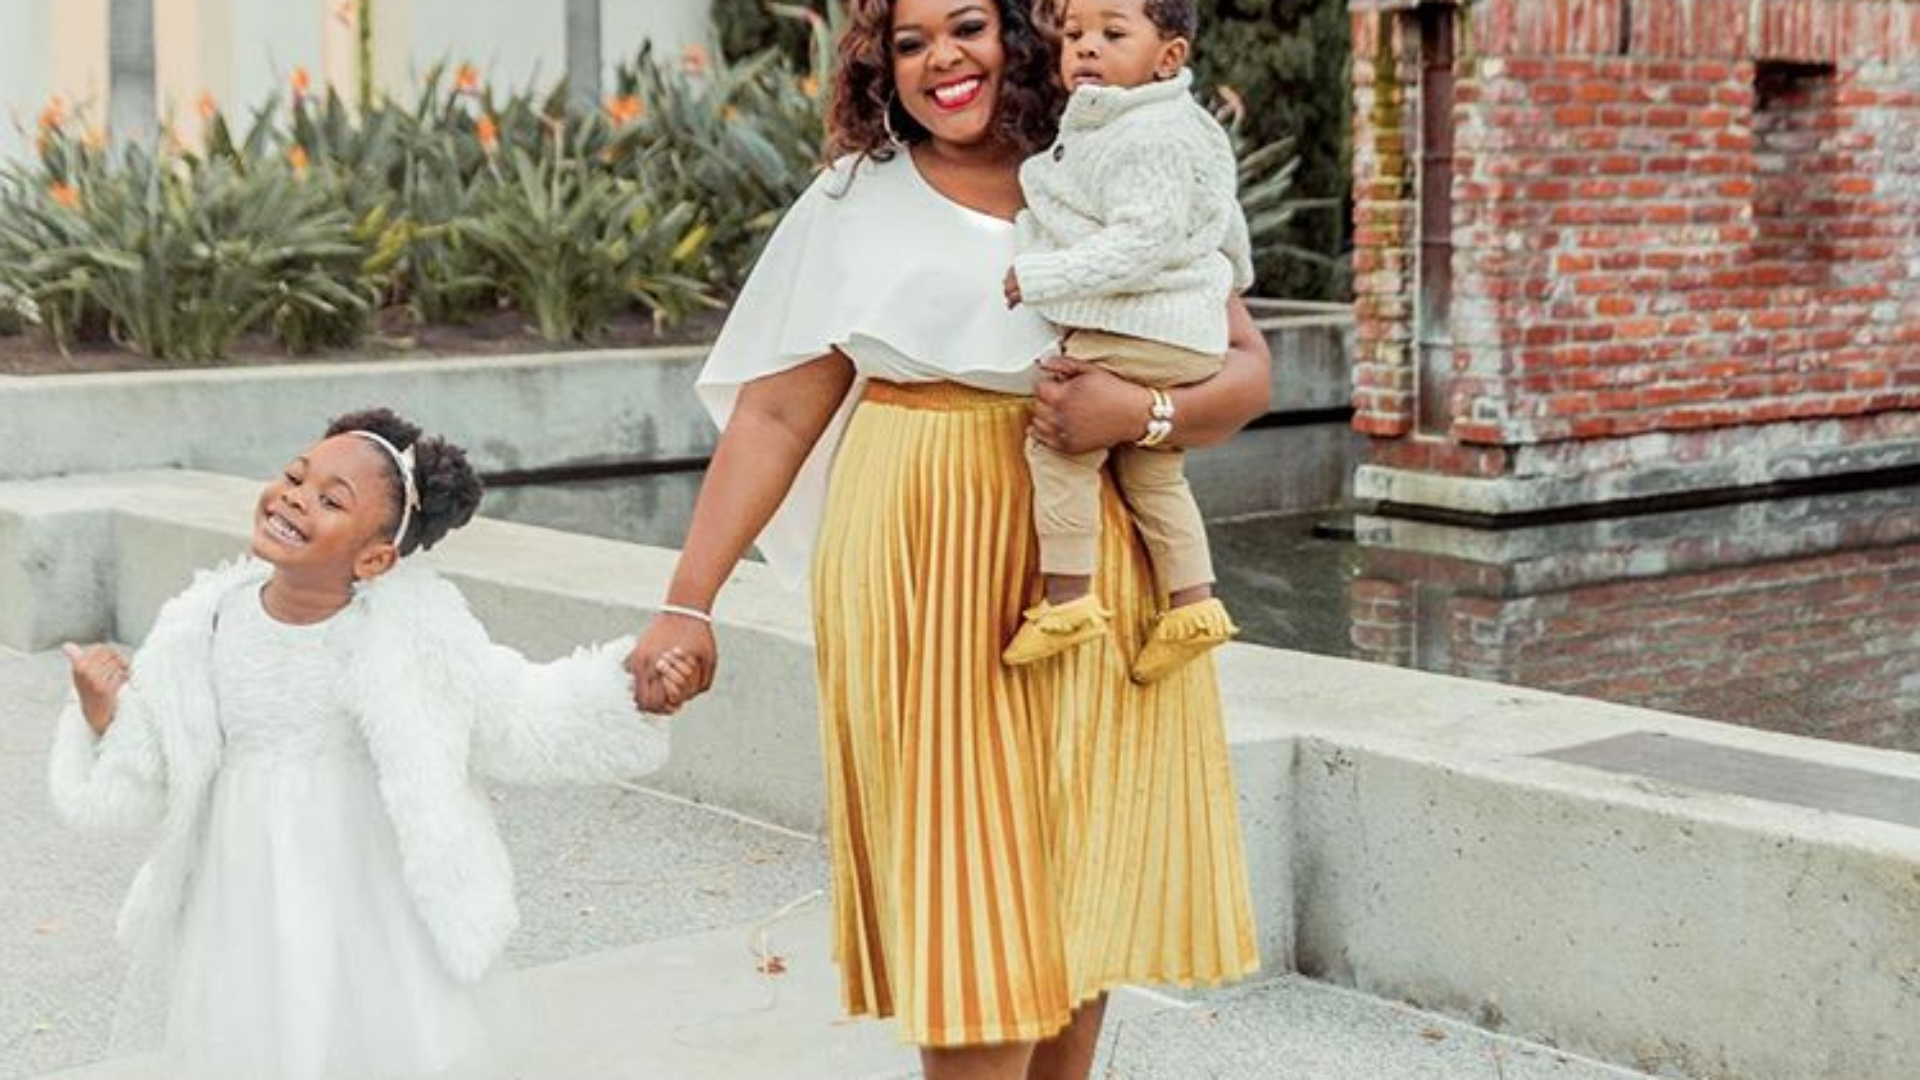 LoveBrownSugar’s Christina Brown Passed This Little Life Lesson Down To Her Kids